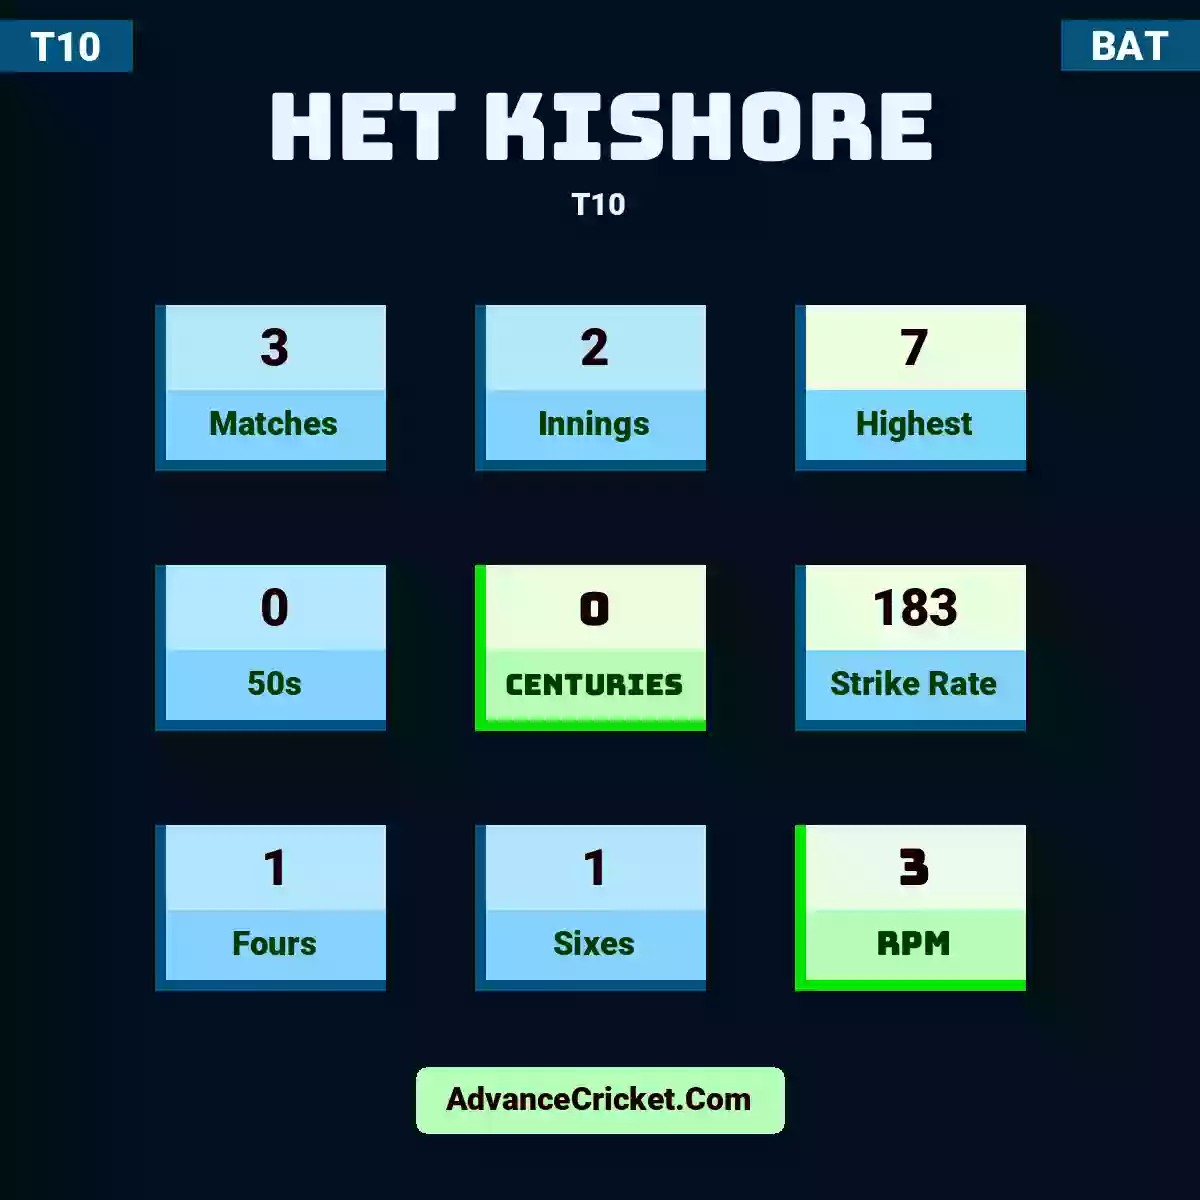 Het Kishore T10 , Het Kishore played 3 matches, scored 7 runs as highest, 0 half-centuries, and 0 centuries, with a strike rate of 183. H.Kishore hit 1 fours and 1 sixes, with an RPM of 3.